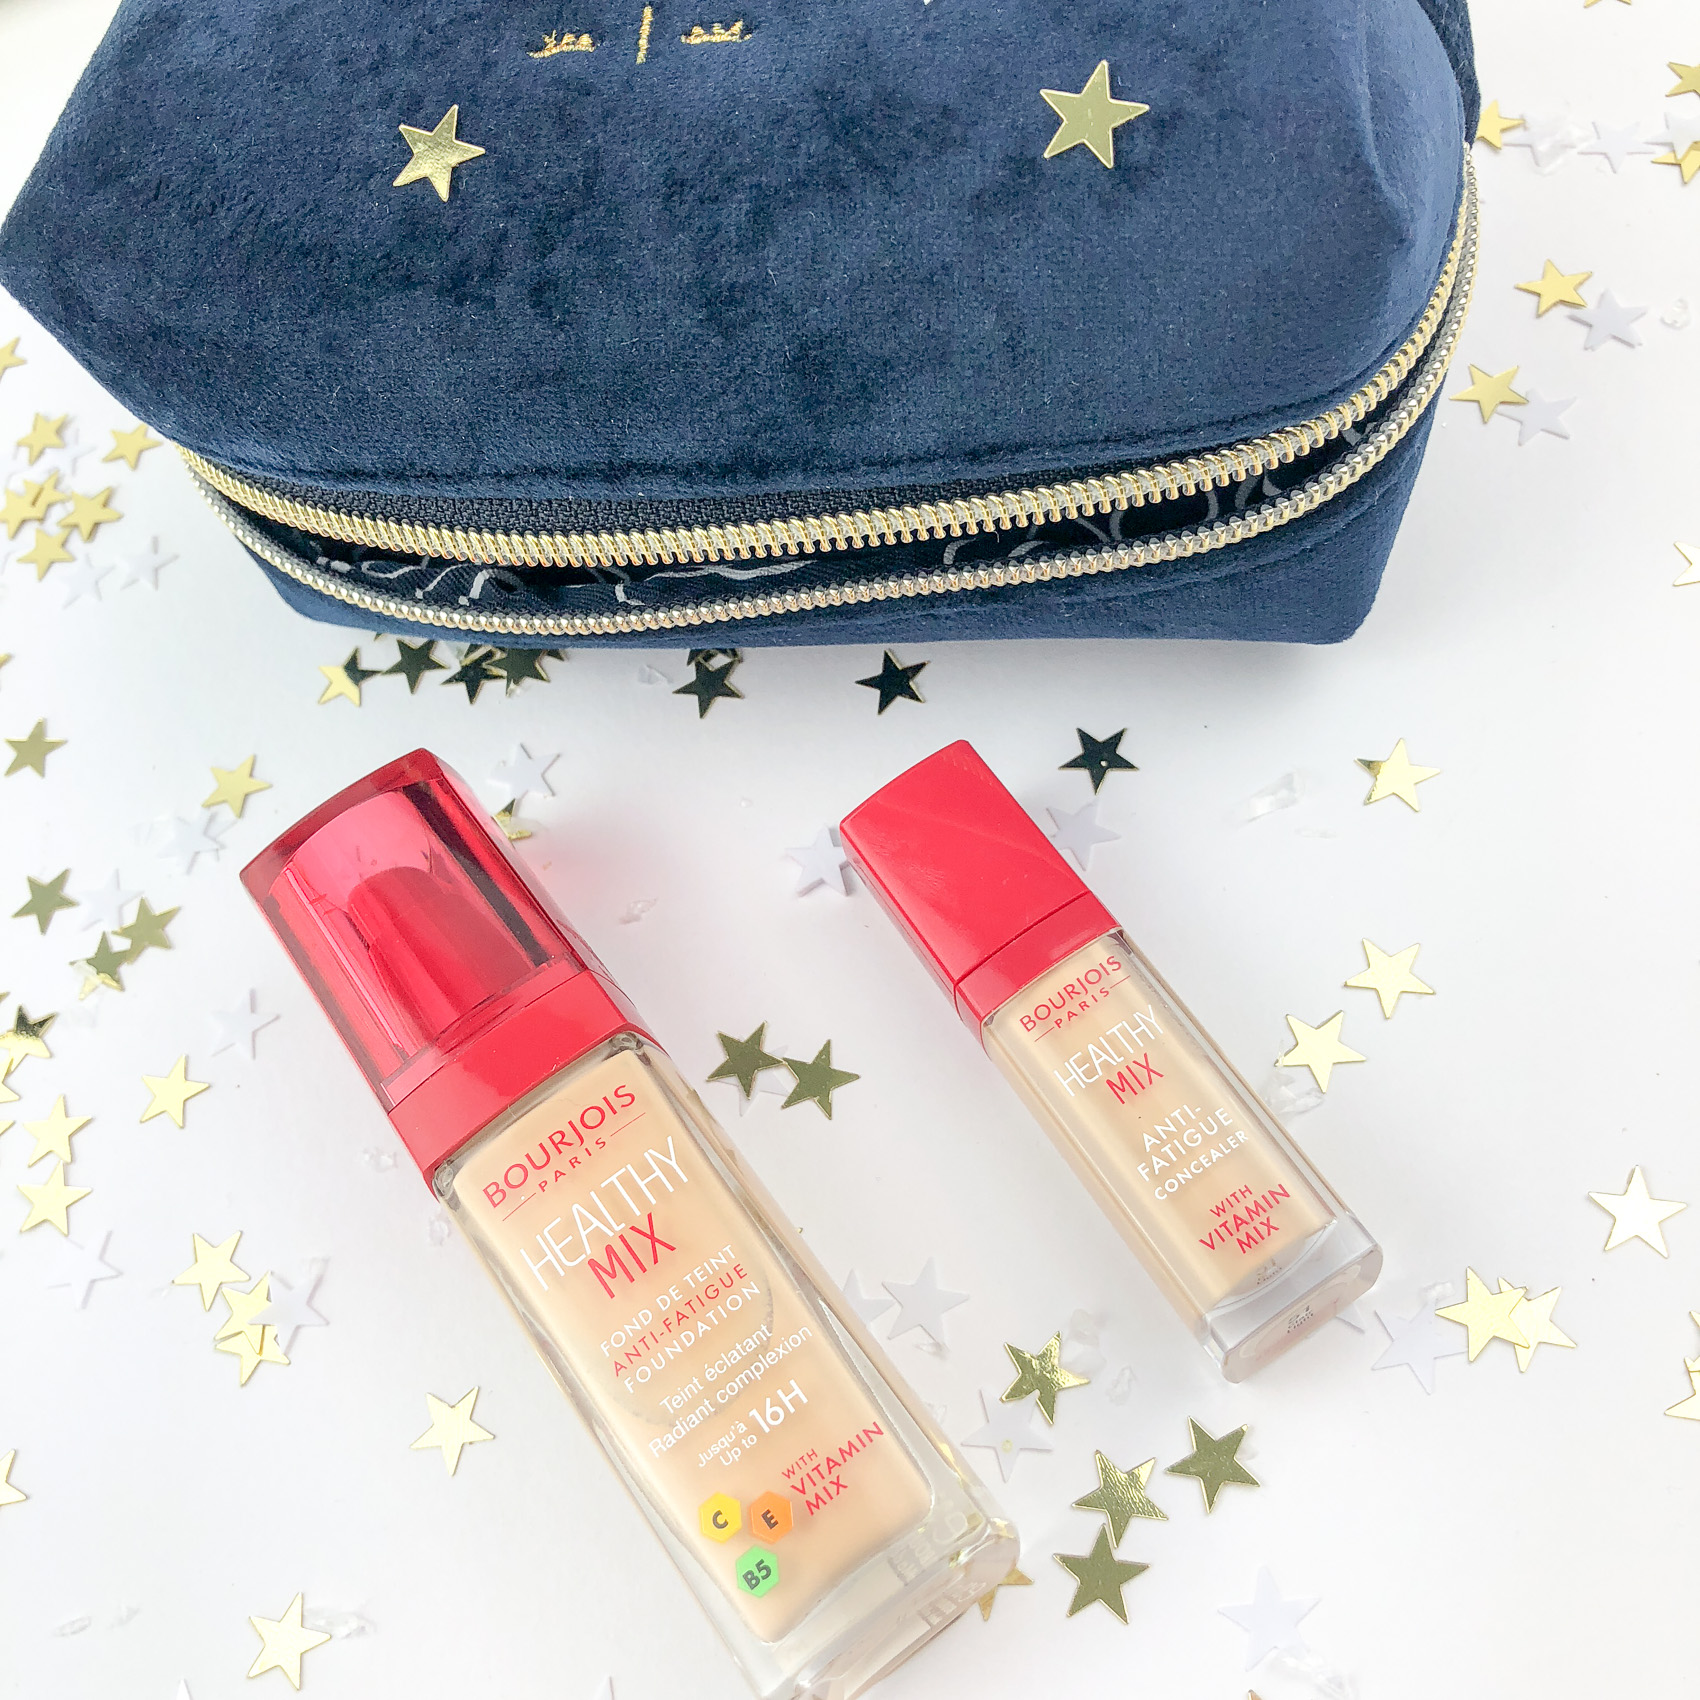 Bourjois Healthy Mix Anti Fatigue Foundation and Concealer.jpg